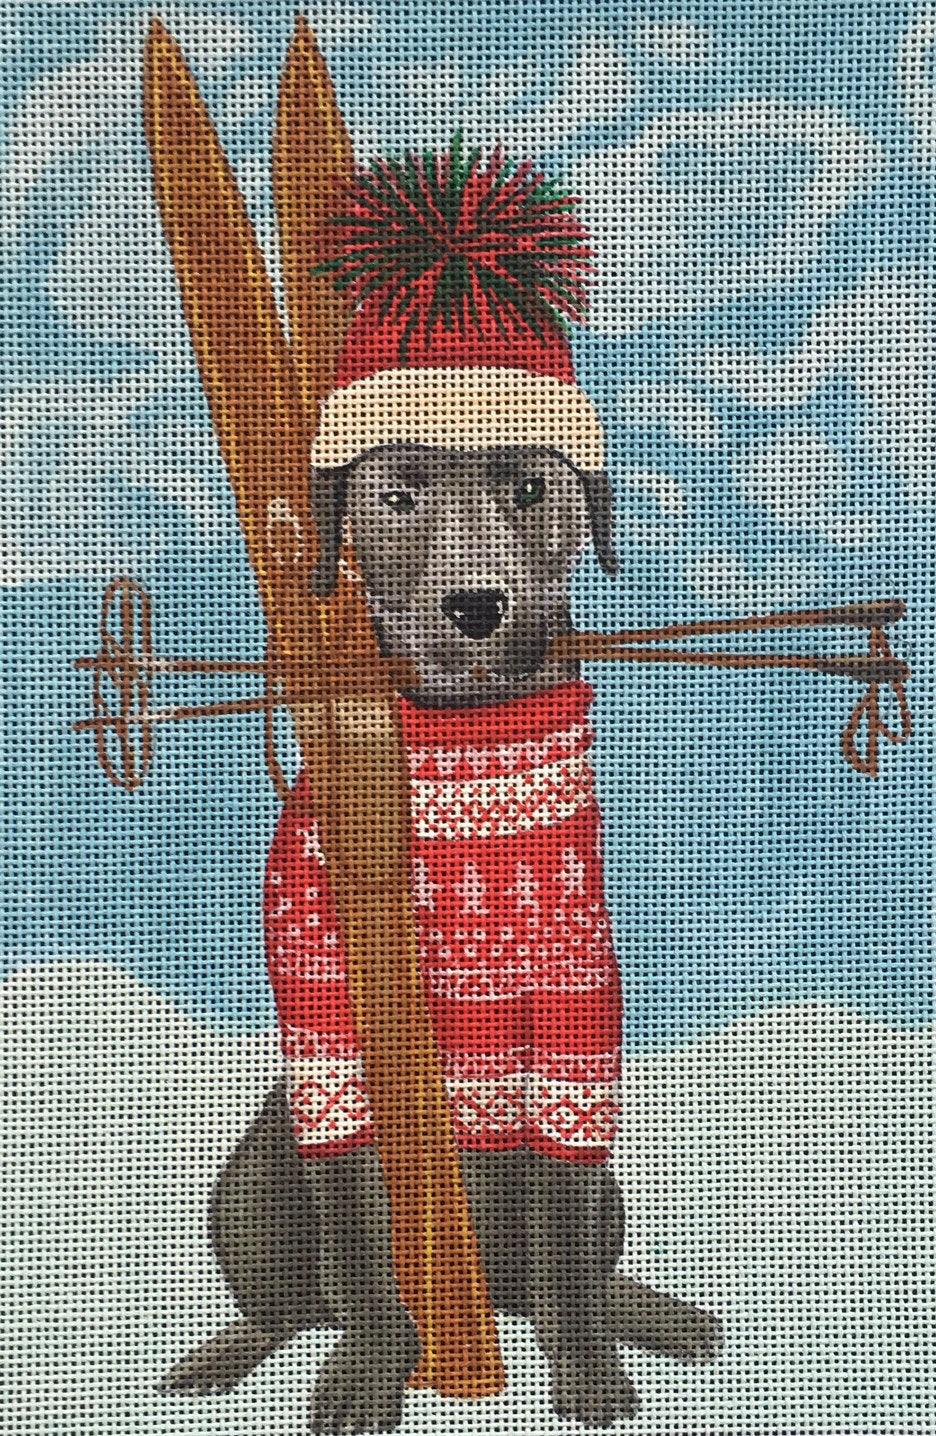 Fab Funky whimsical needlepoint canvas of a black labrador dog wearing a fair isle sweater and a beanie with skis and ski poles in the snow